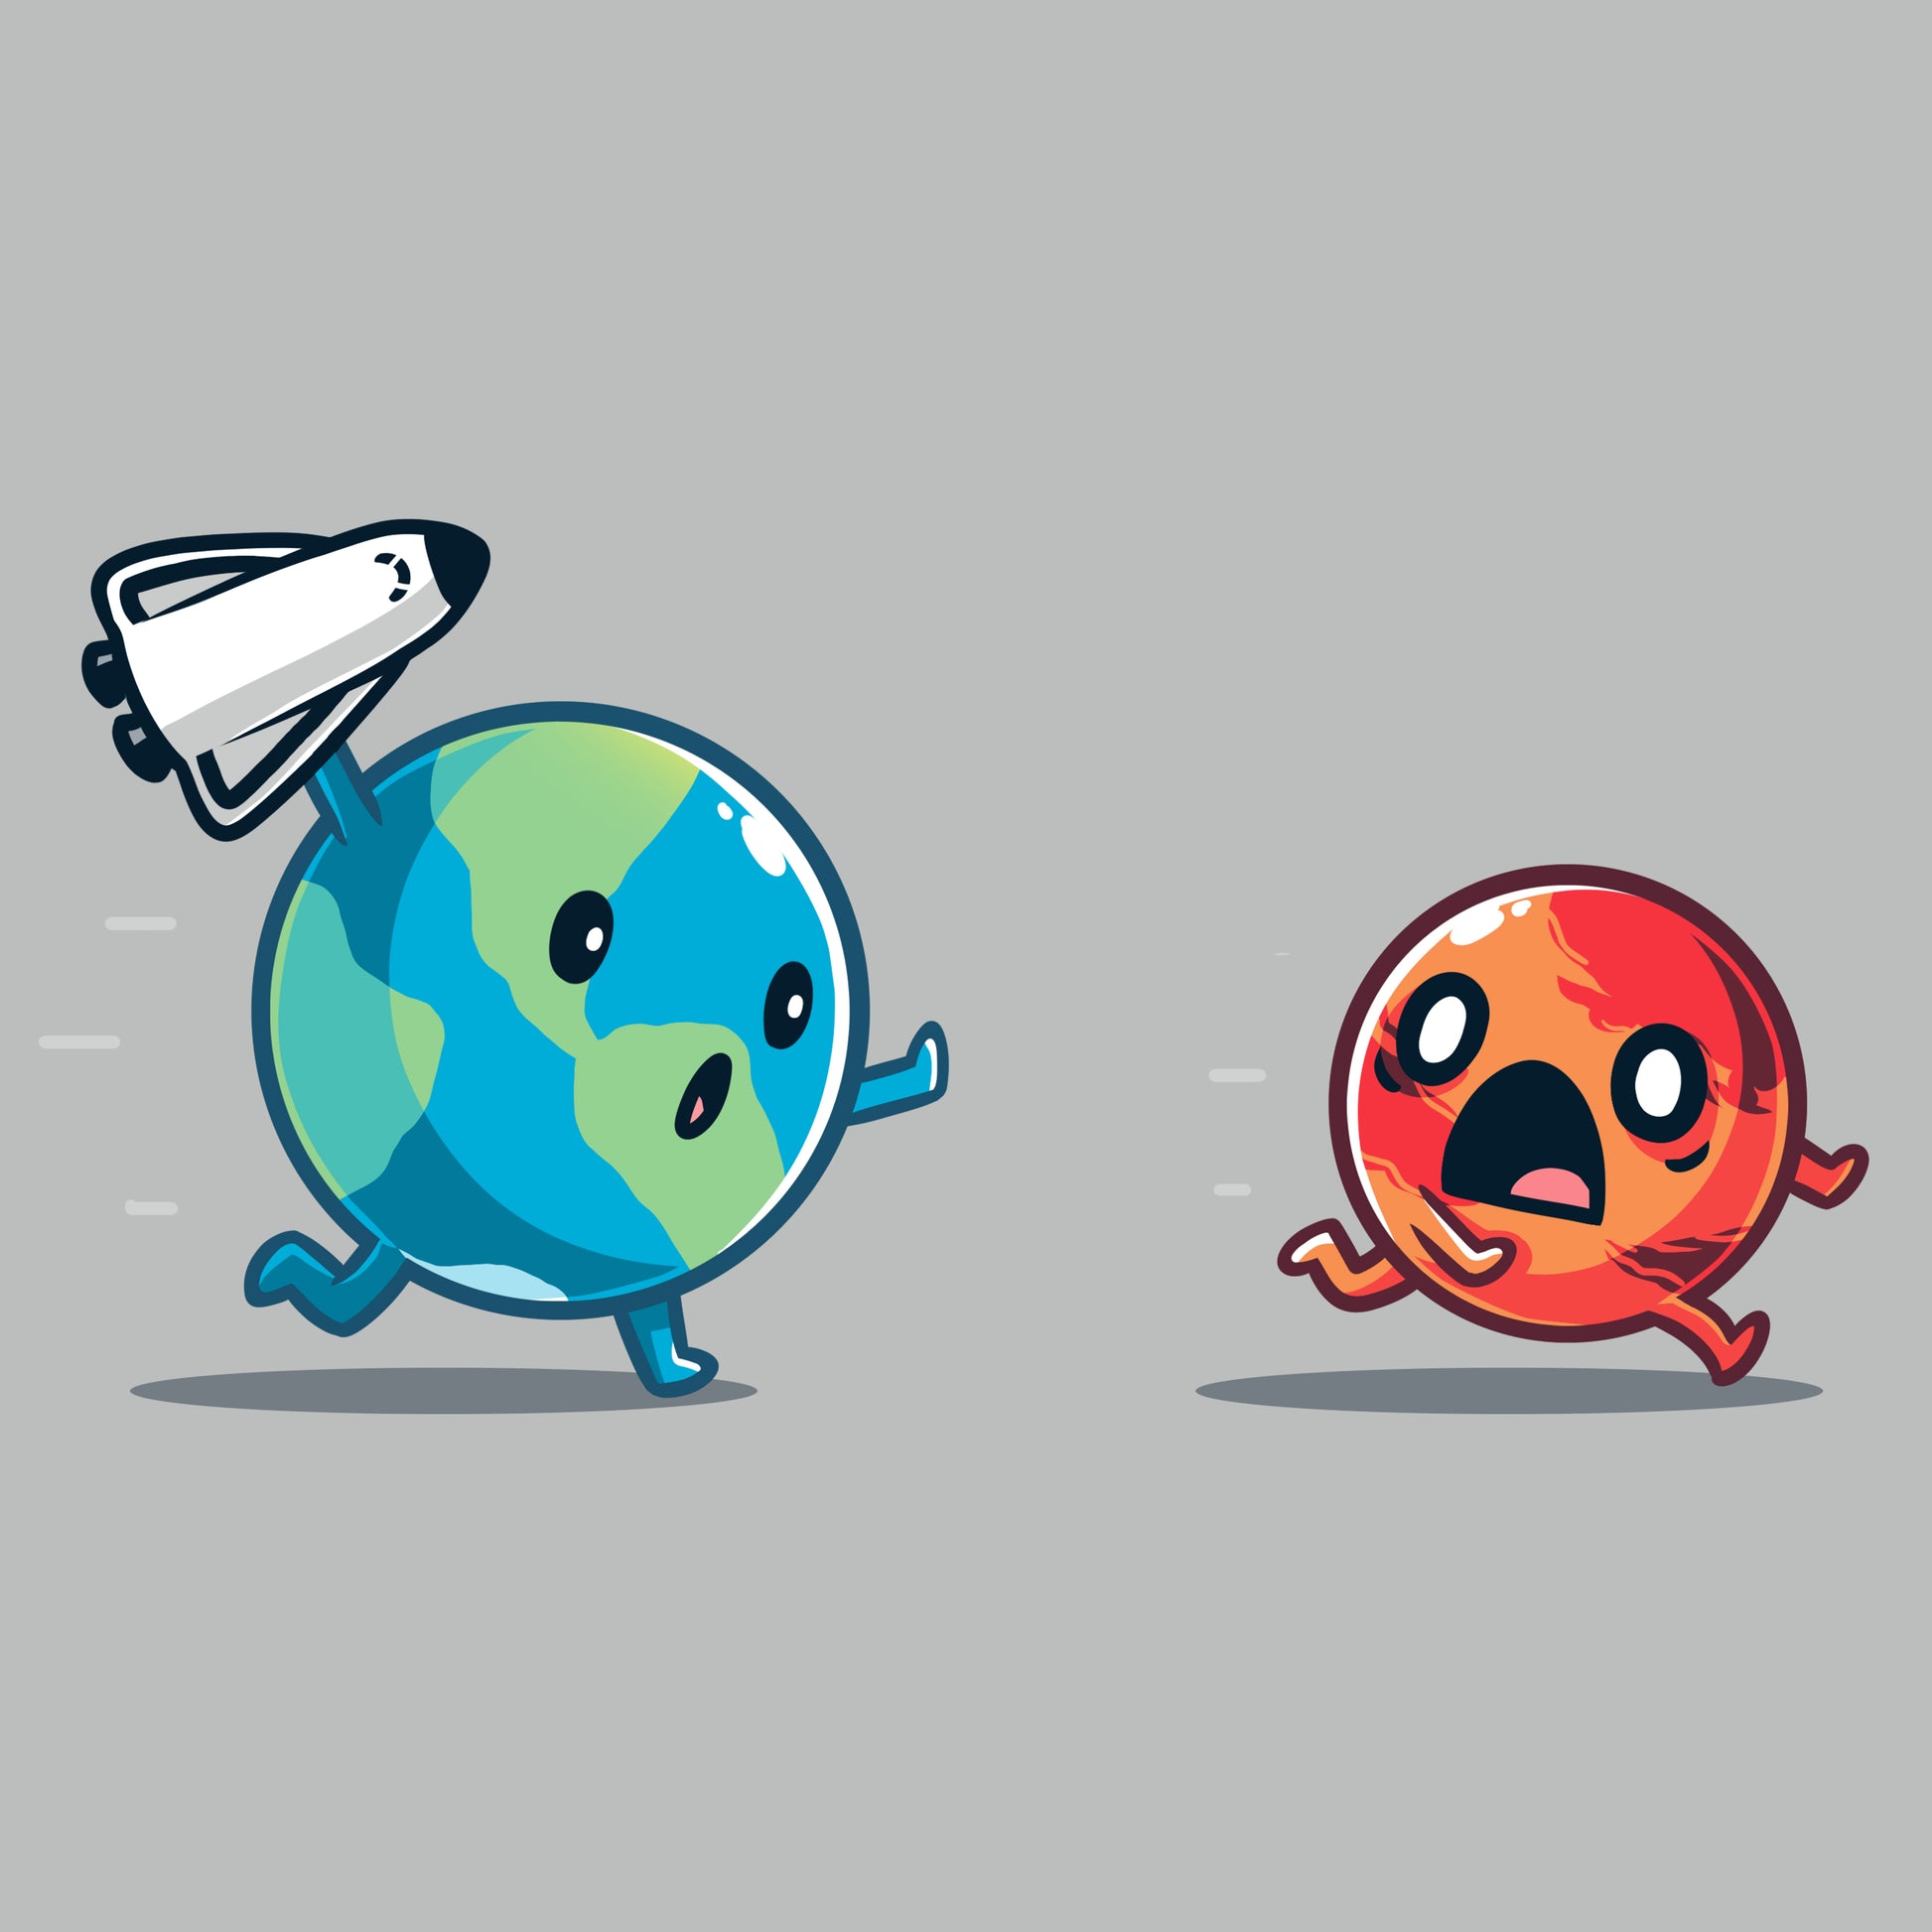 The earth and a rocket are running away from each other in a TeeTurtle Mars Invasion scenario.